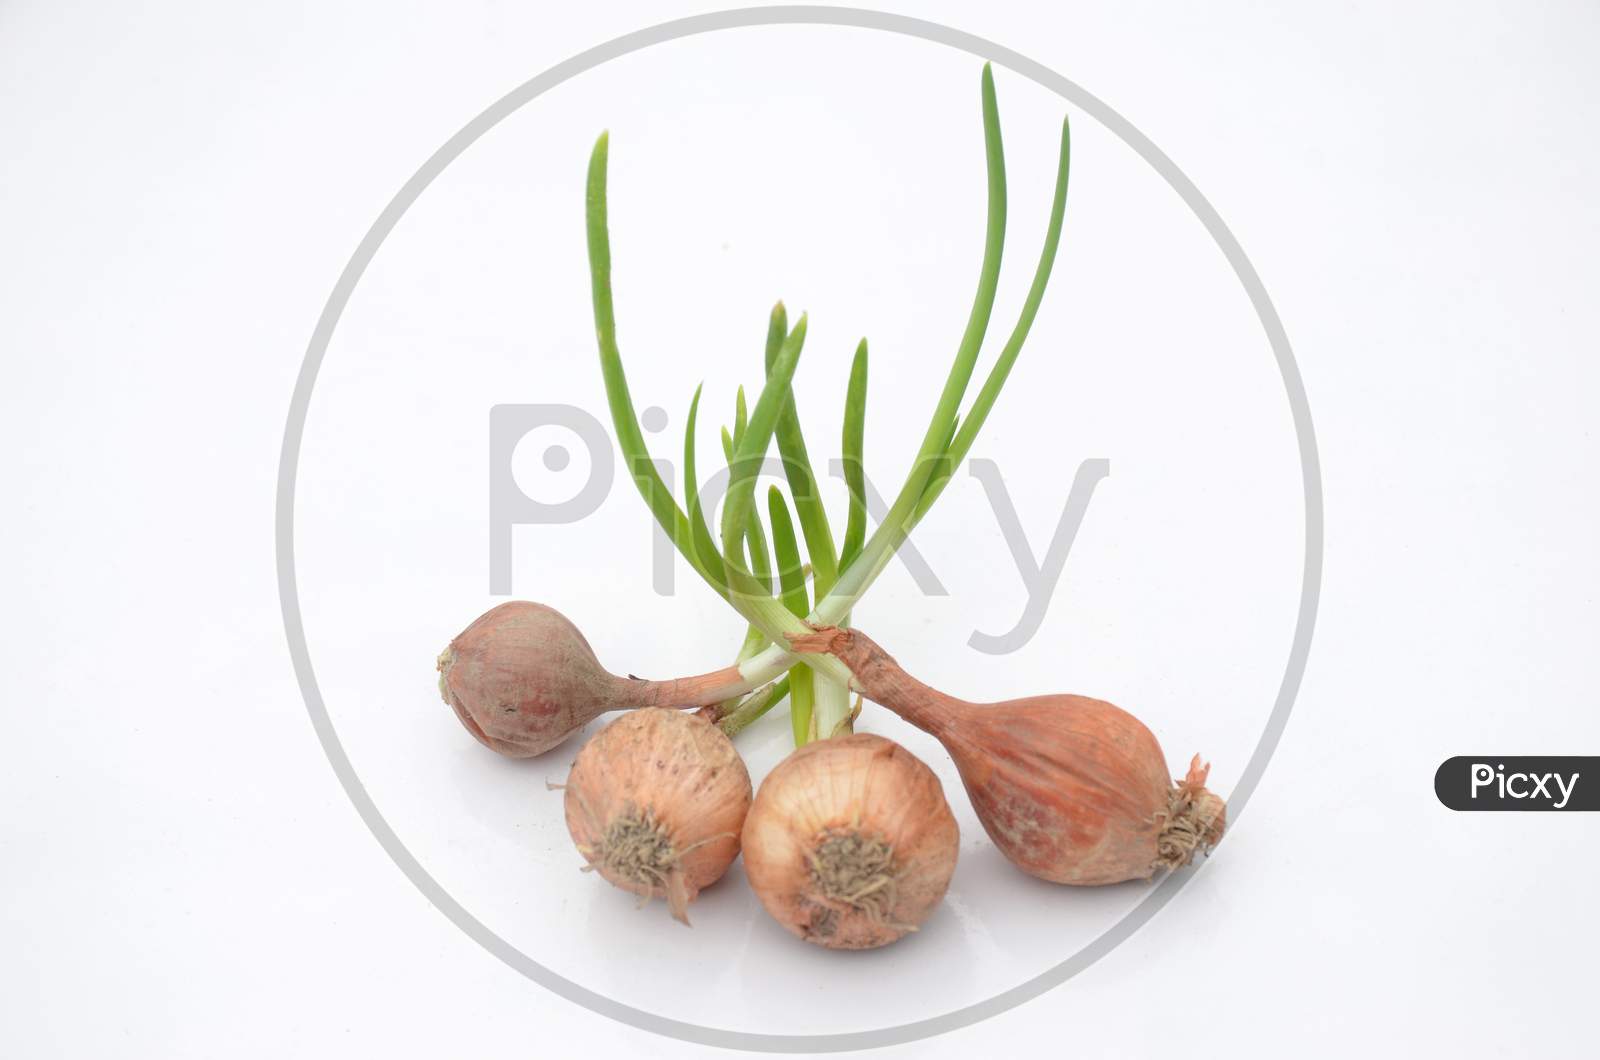 Bunch The Red Green Onion Soil Heap Isolated On White Background.